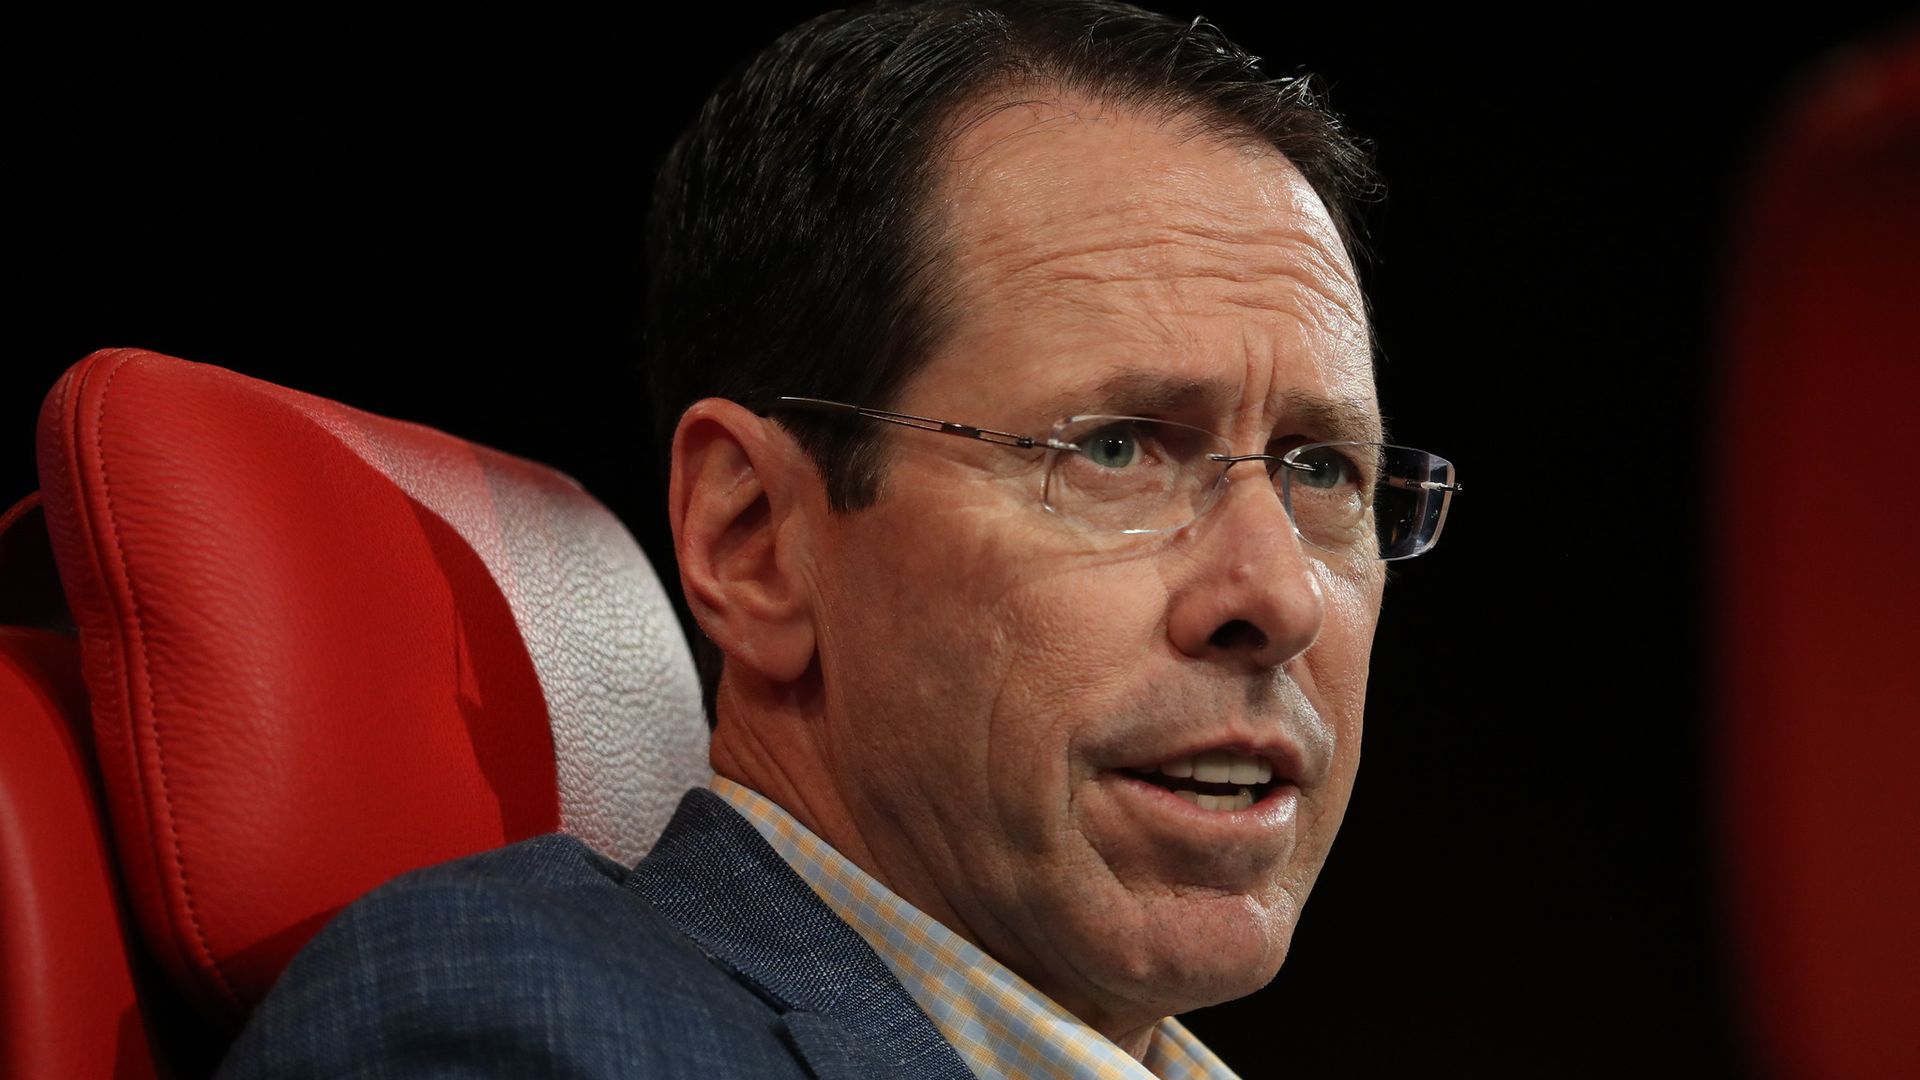 AT&T CEO Randall Stephenson face in closeup